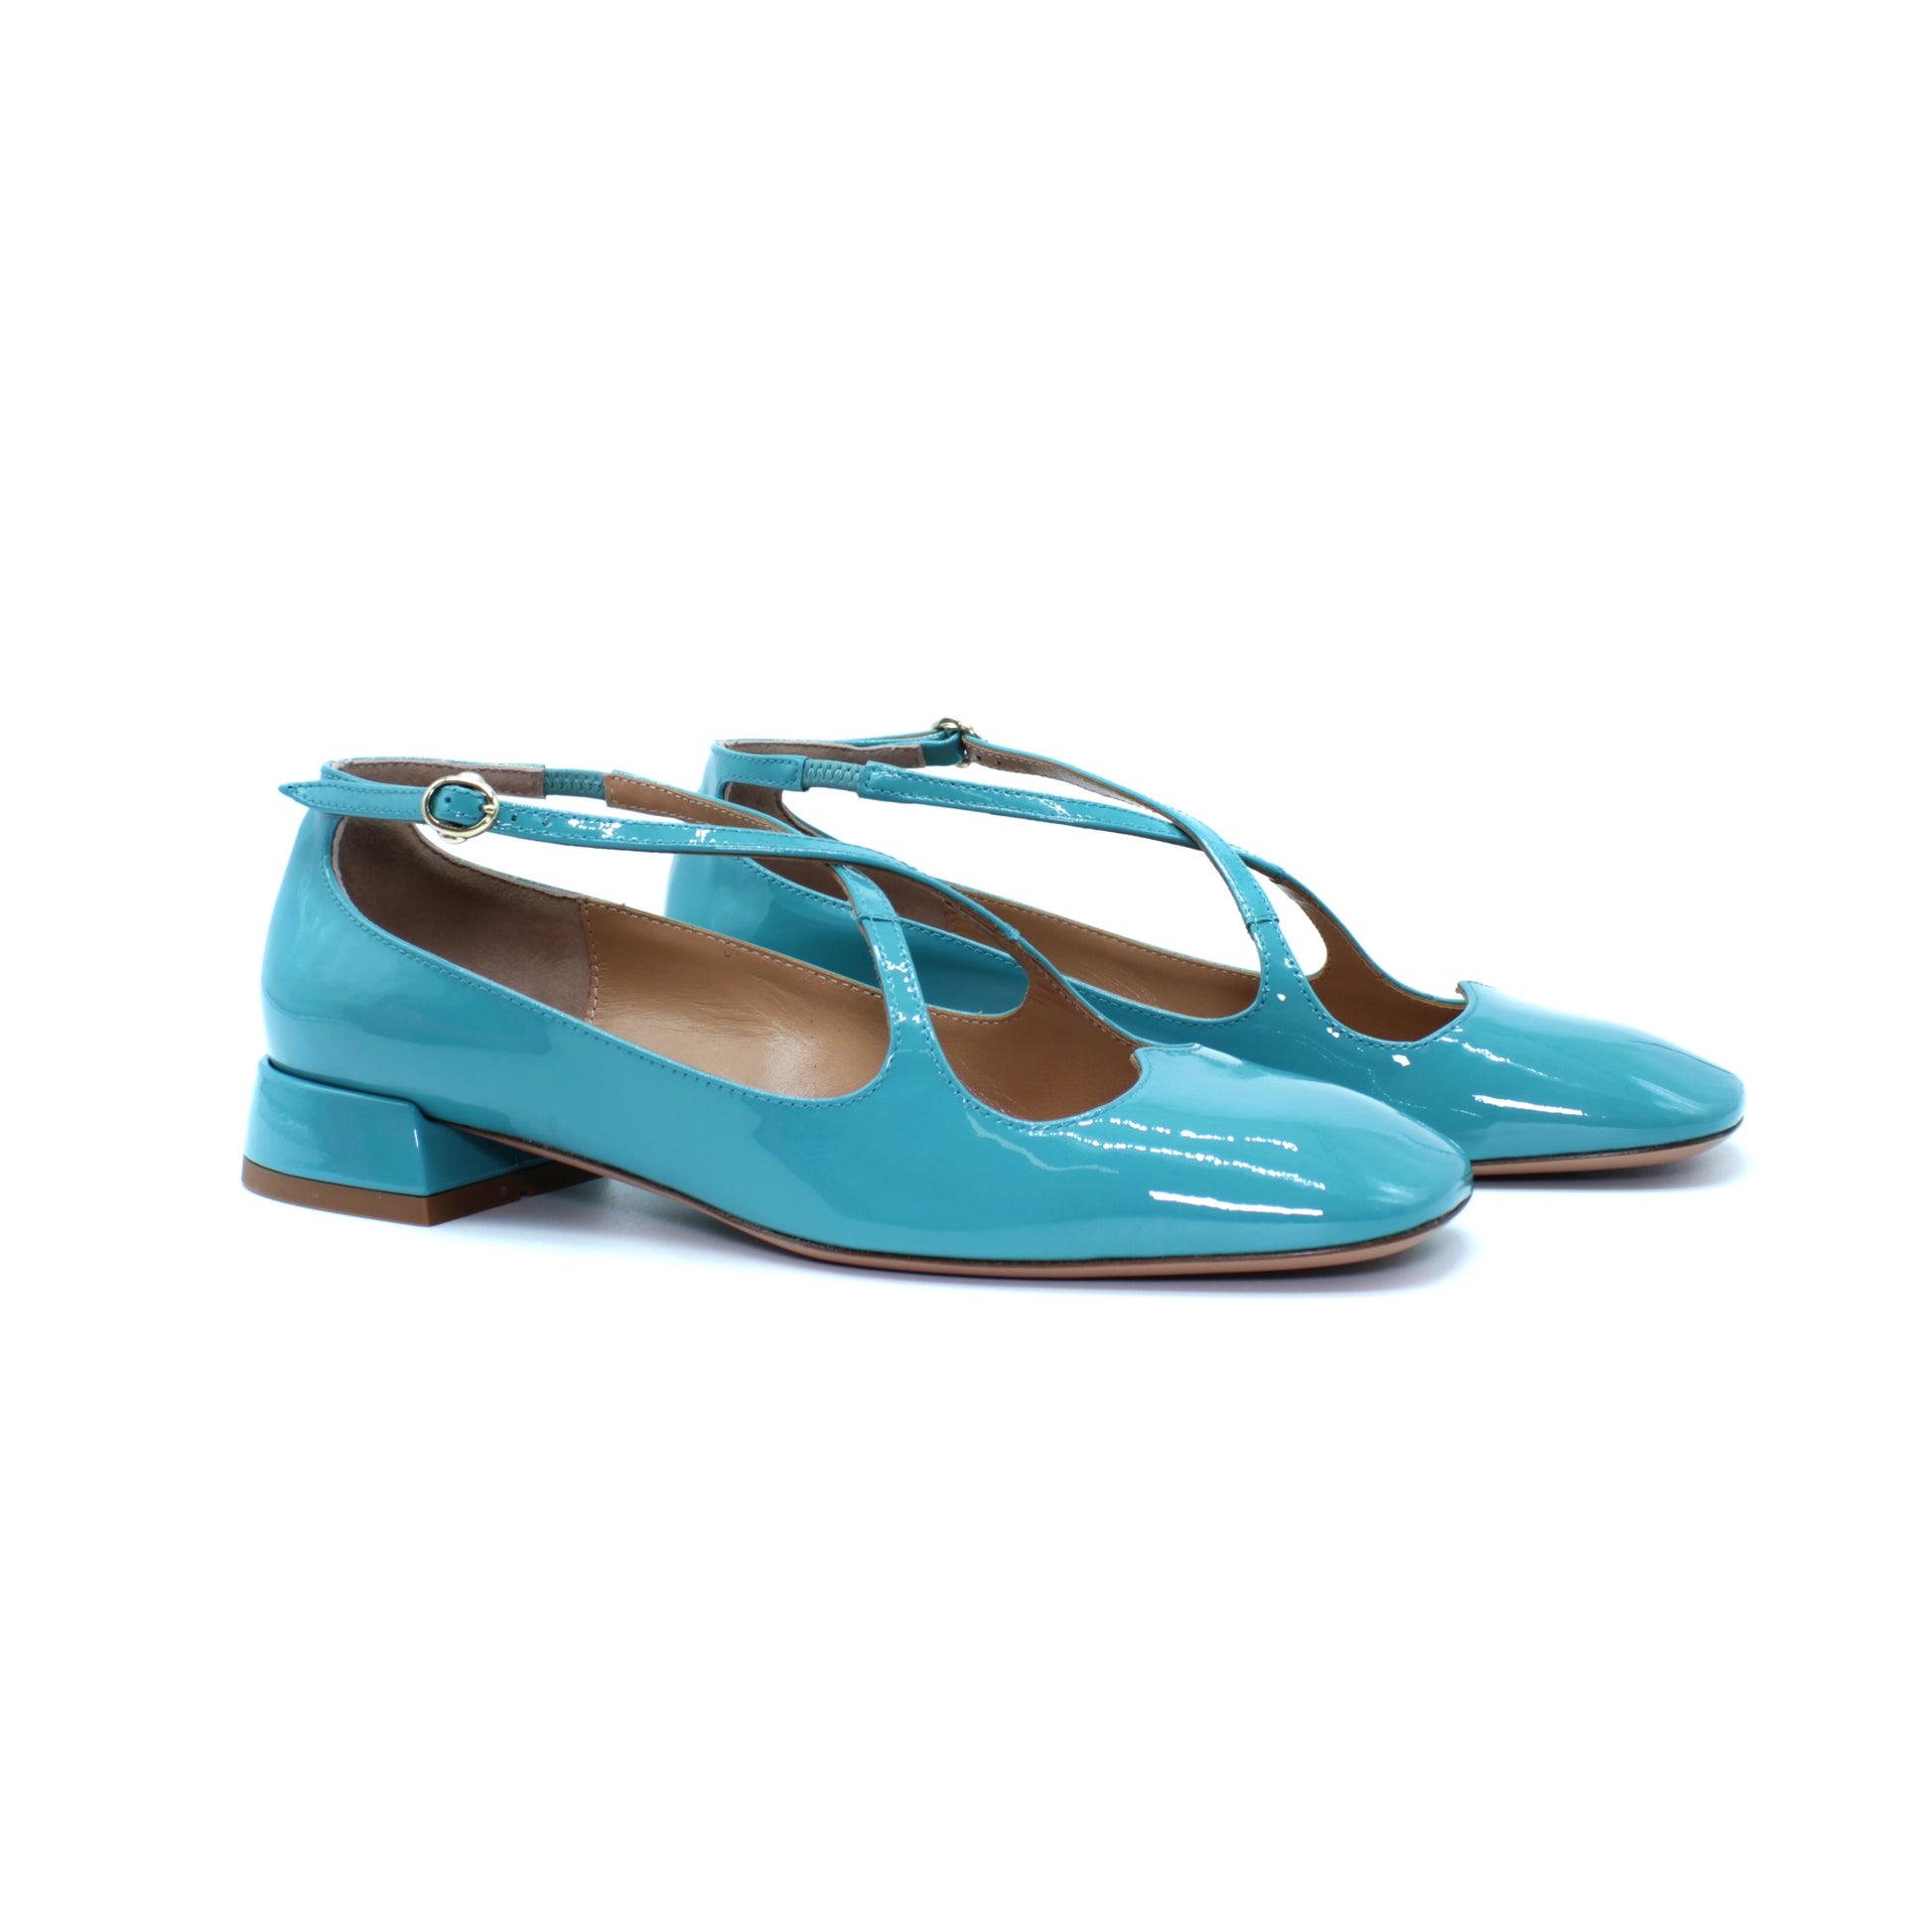 Two for Love in turquoise patent leather A.Bocca